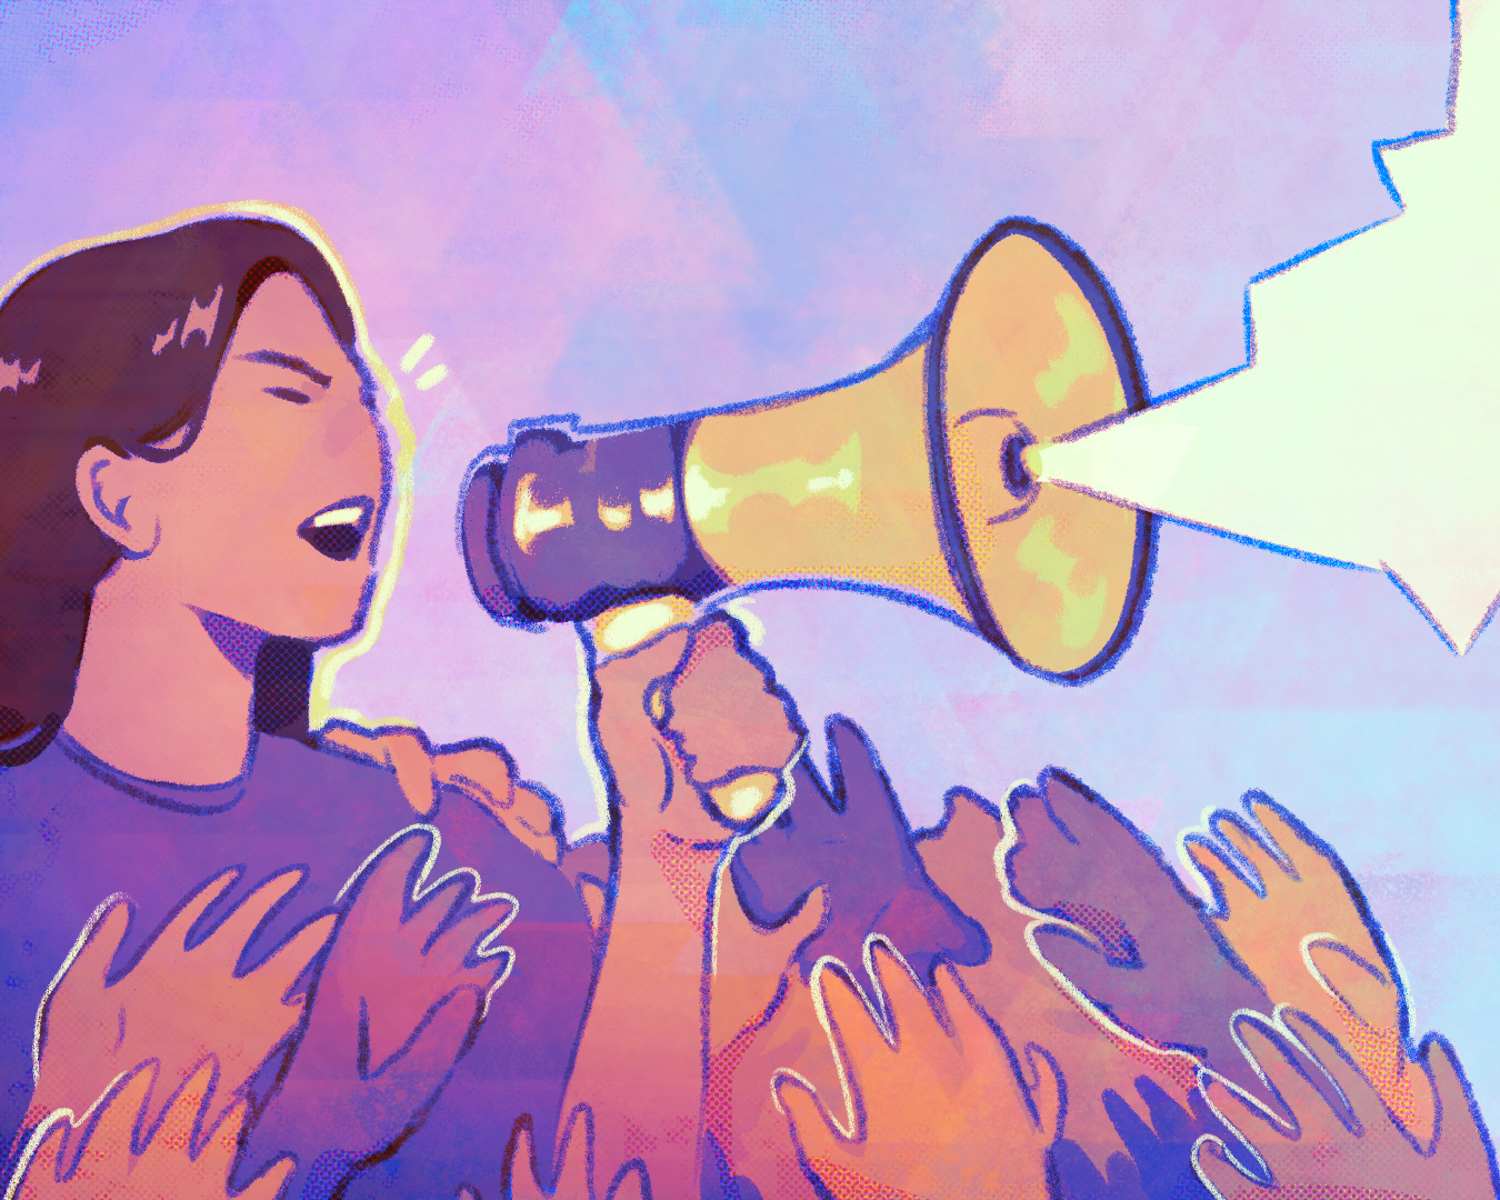 Illustration of a woman yelling into a bullhorn during a protest